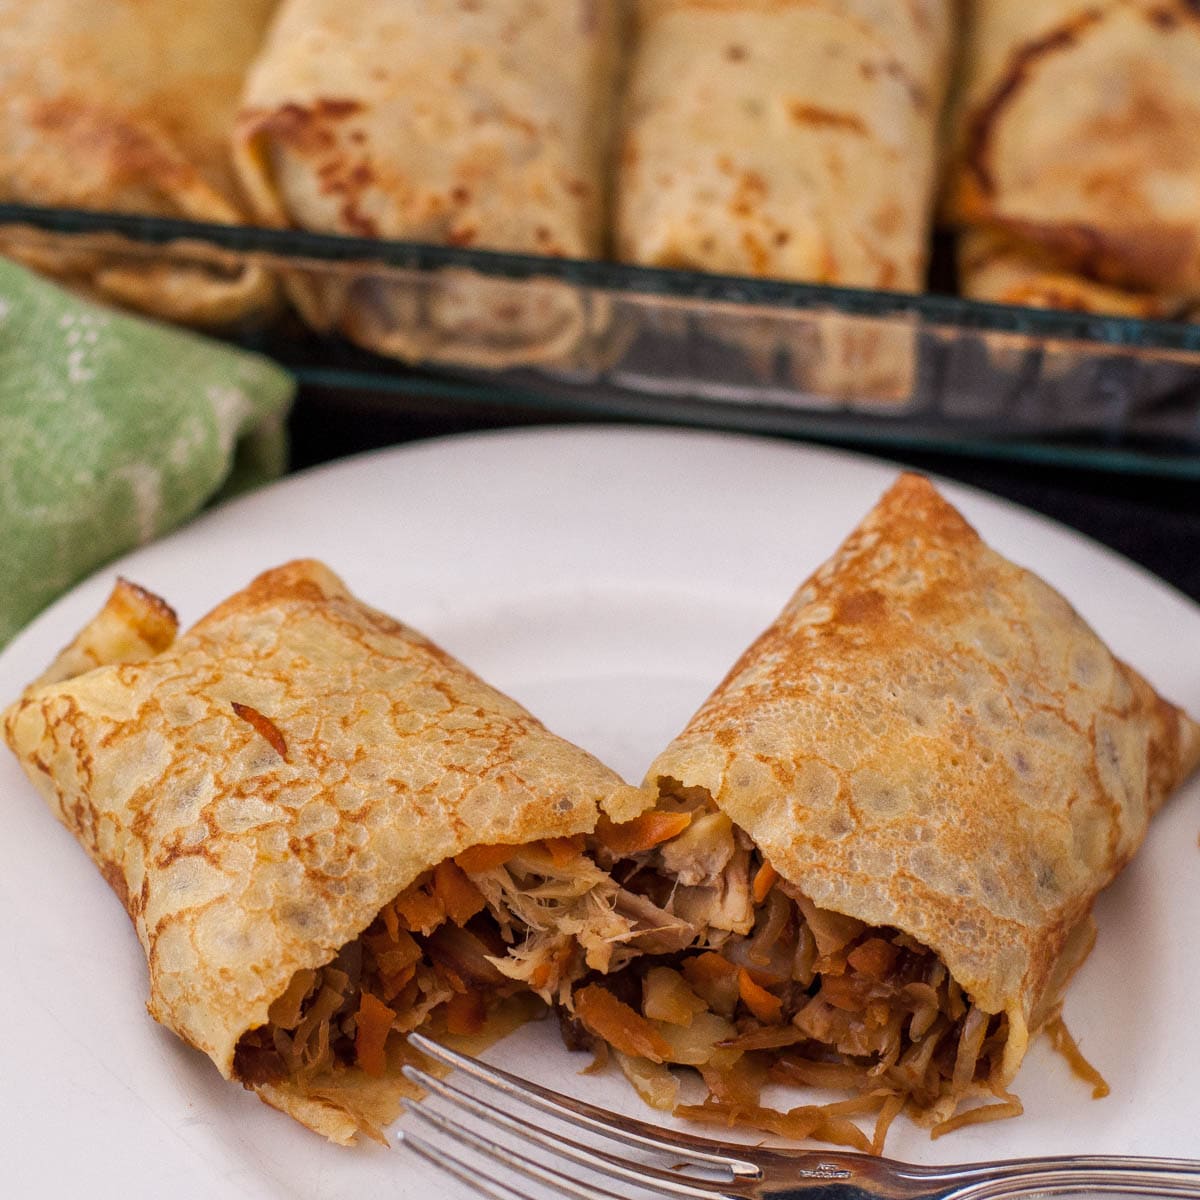 Savory Crepes Spring Roll Style